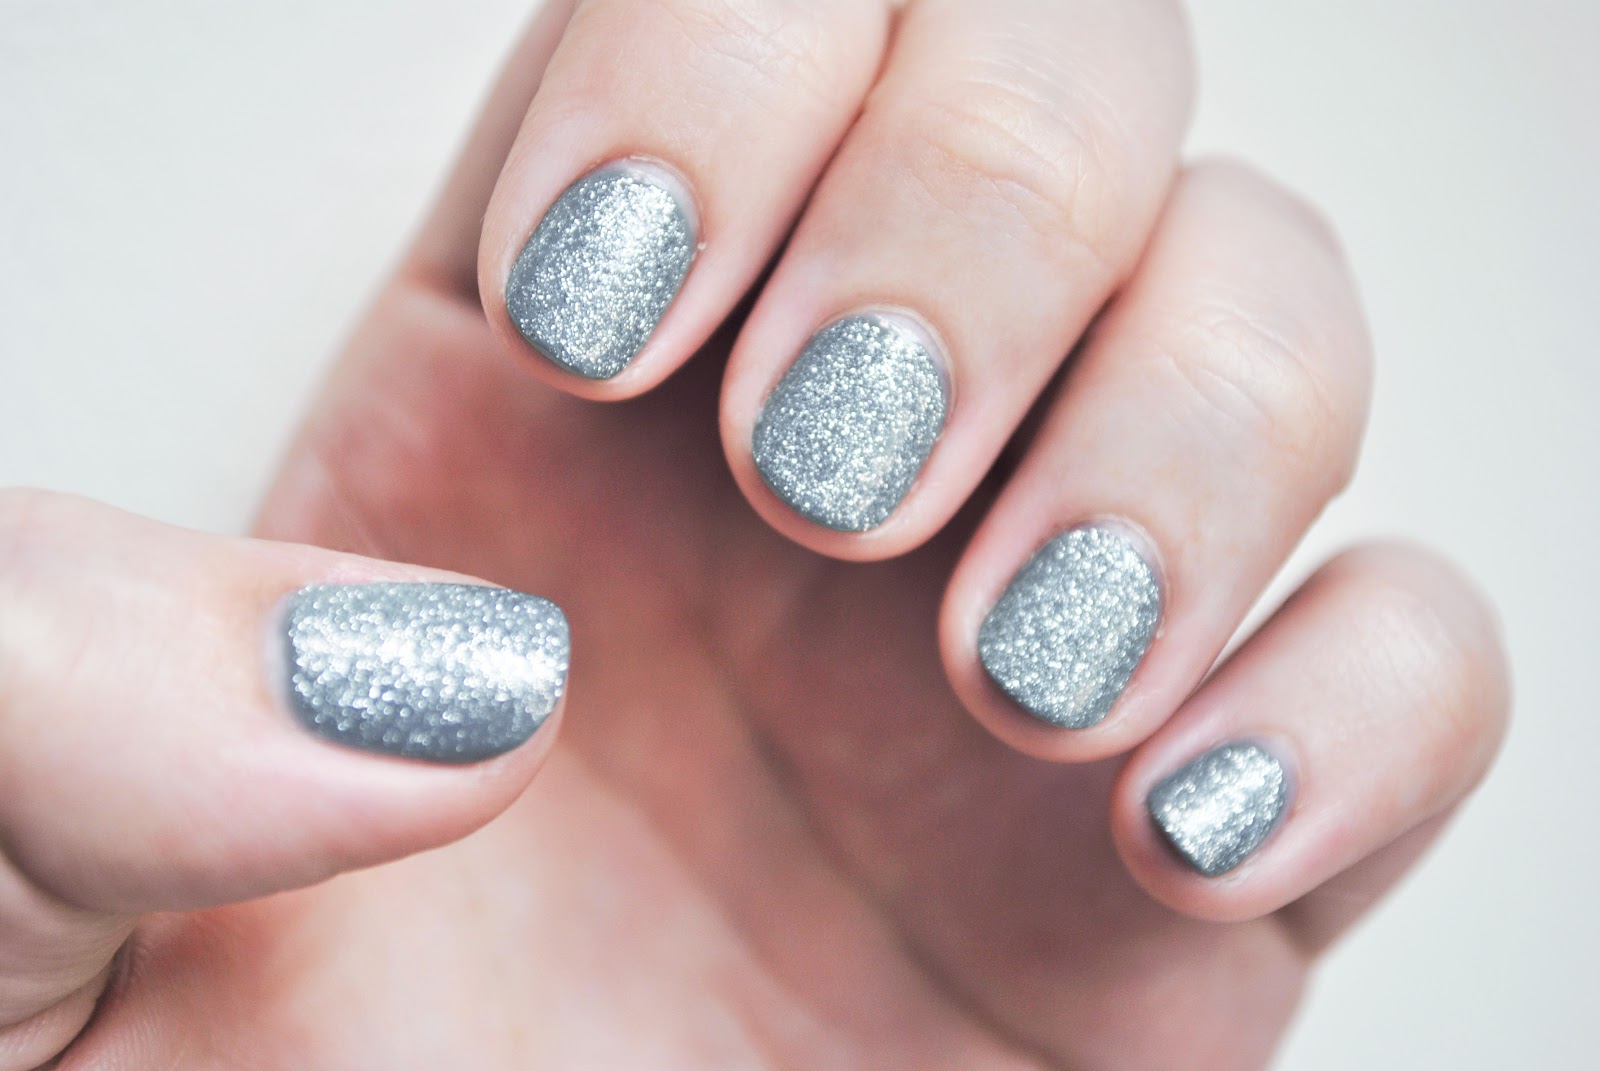 6. Glittery Silver Nail Designs for a Glamorous Touch - wide 7